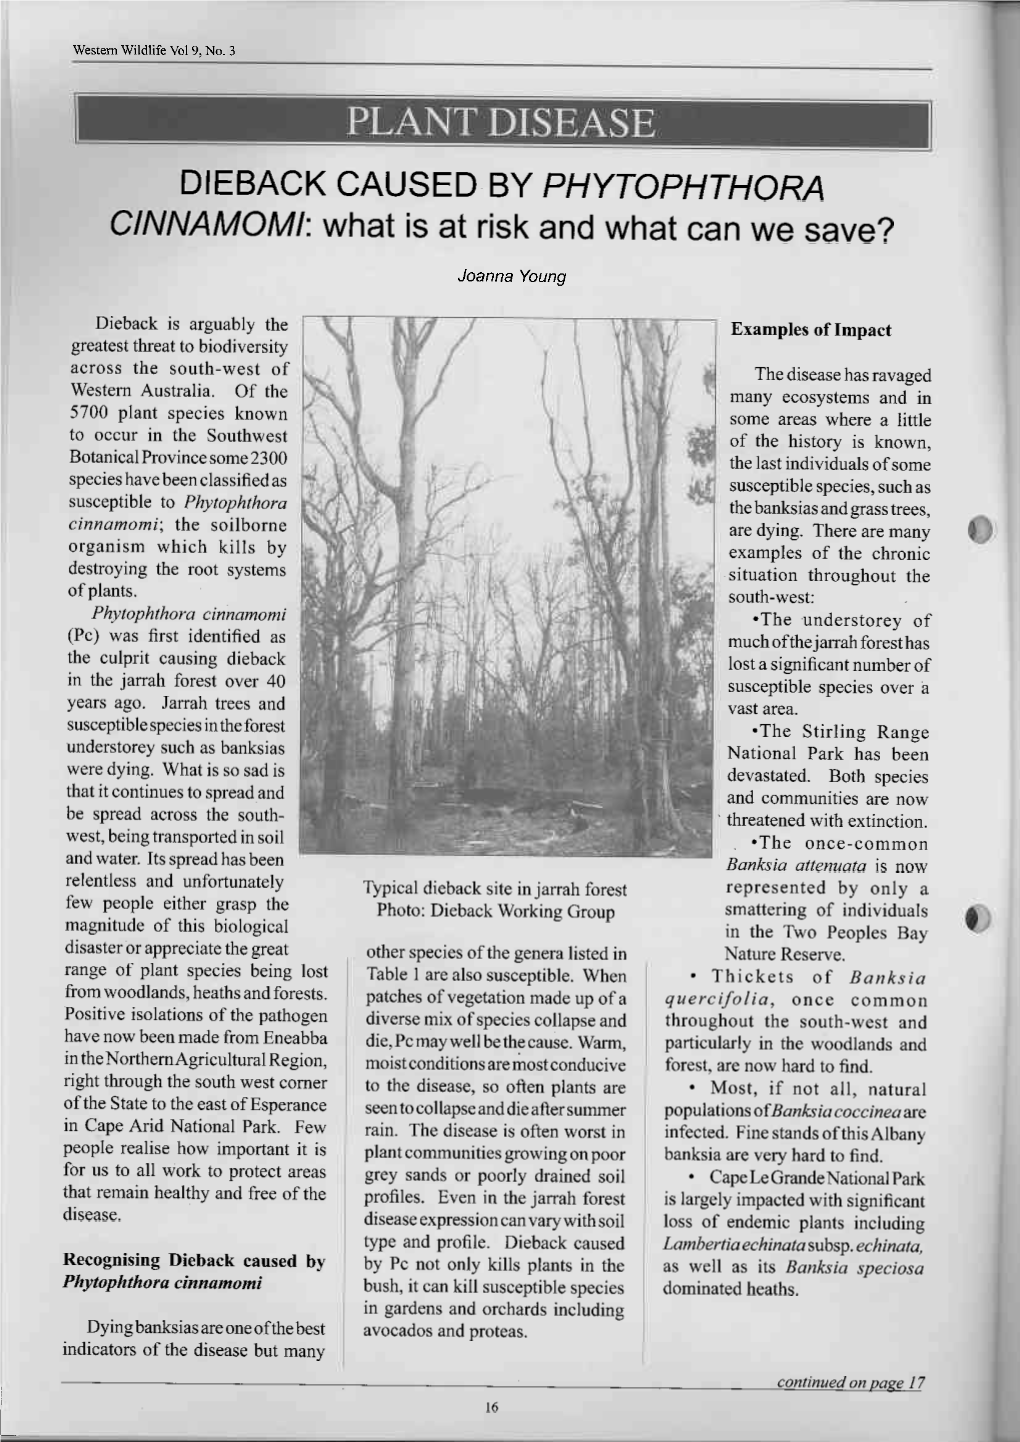 CINNAMOMI:What Is at Riskand What Can We Save?